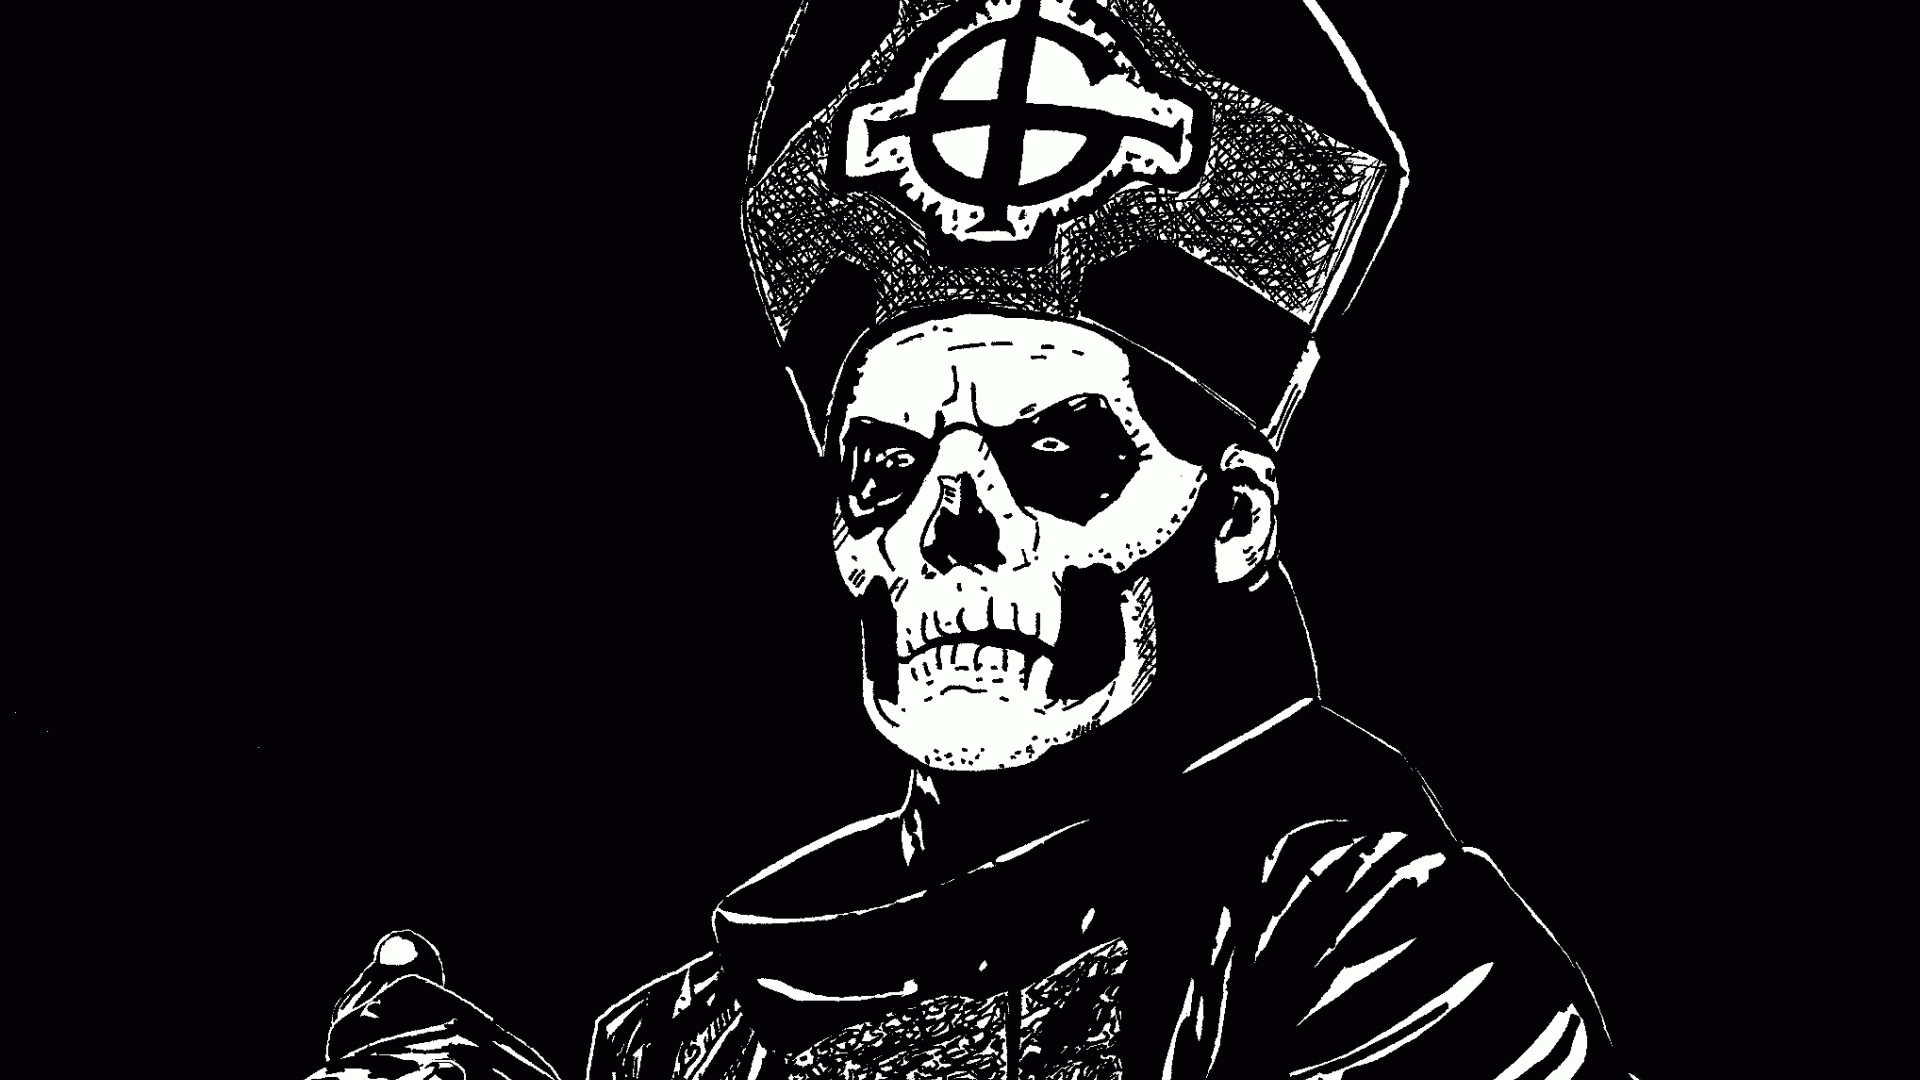 Ghost (Band): A member of the Group of Nameless Ghouls, A Ghoul Writer, Cardinal Copia. 1920x1080 Full HD Wallpaper.